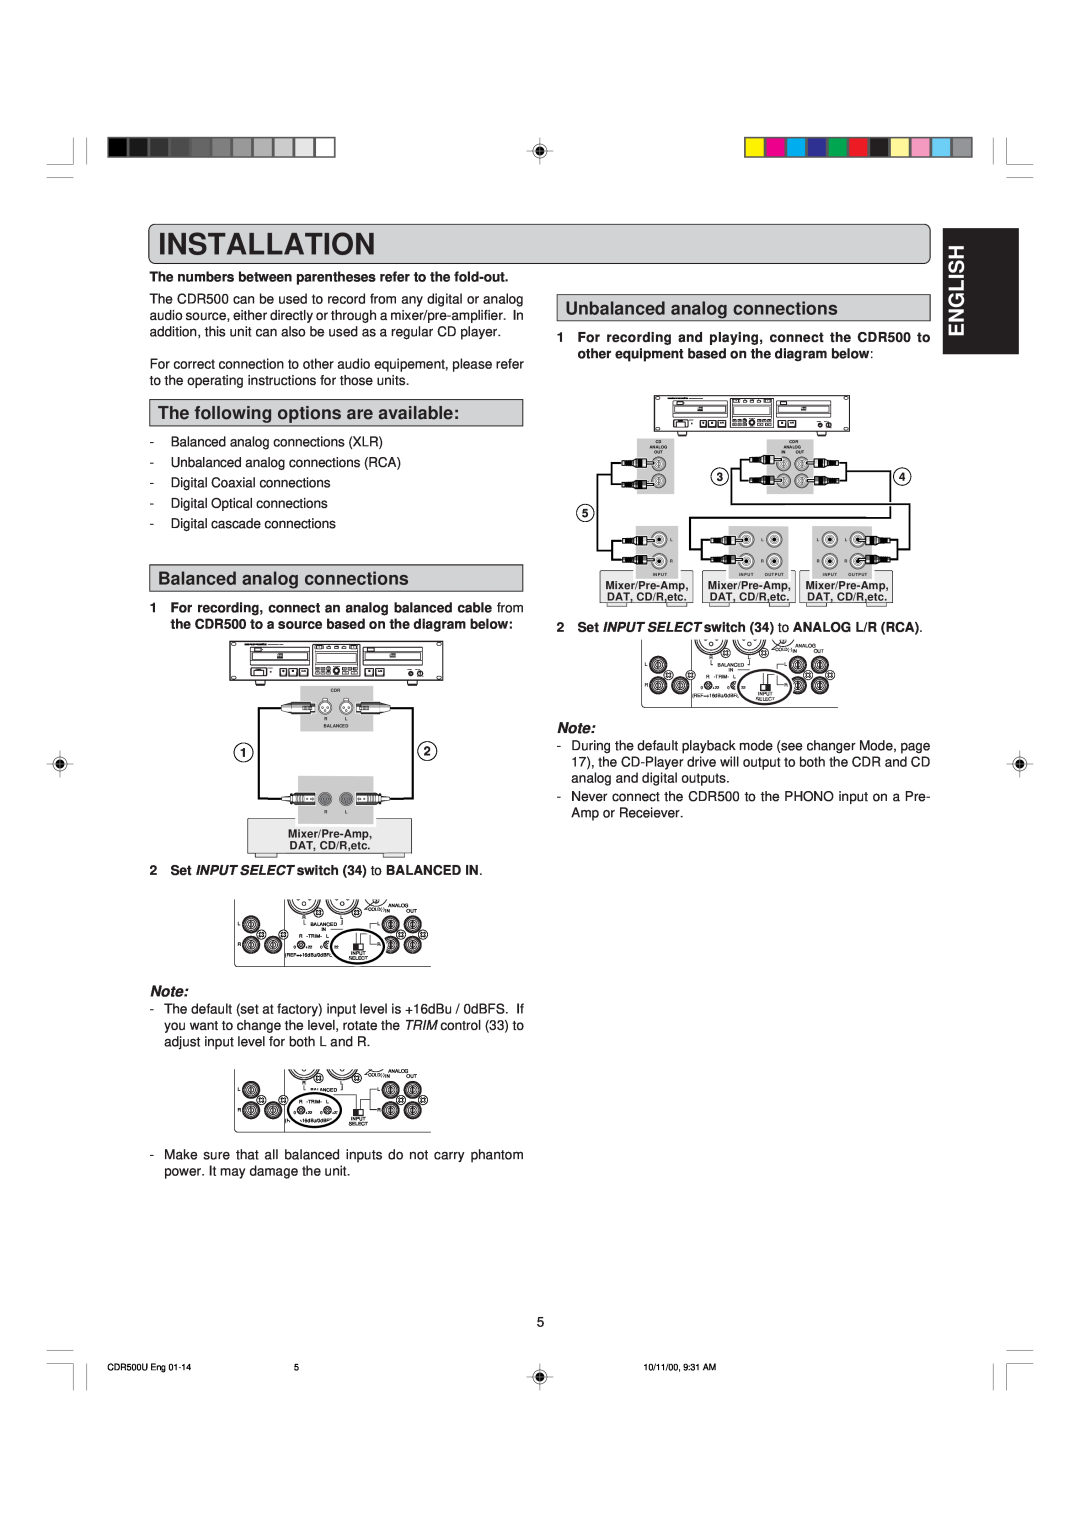 Marantz CDR500 manual Installation, English, The following options are available, Balanced analog connections 